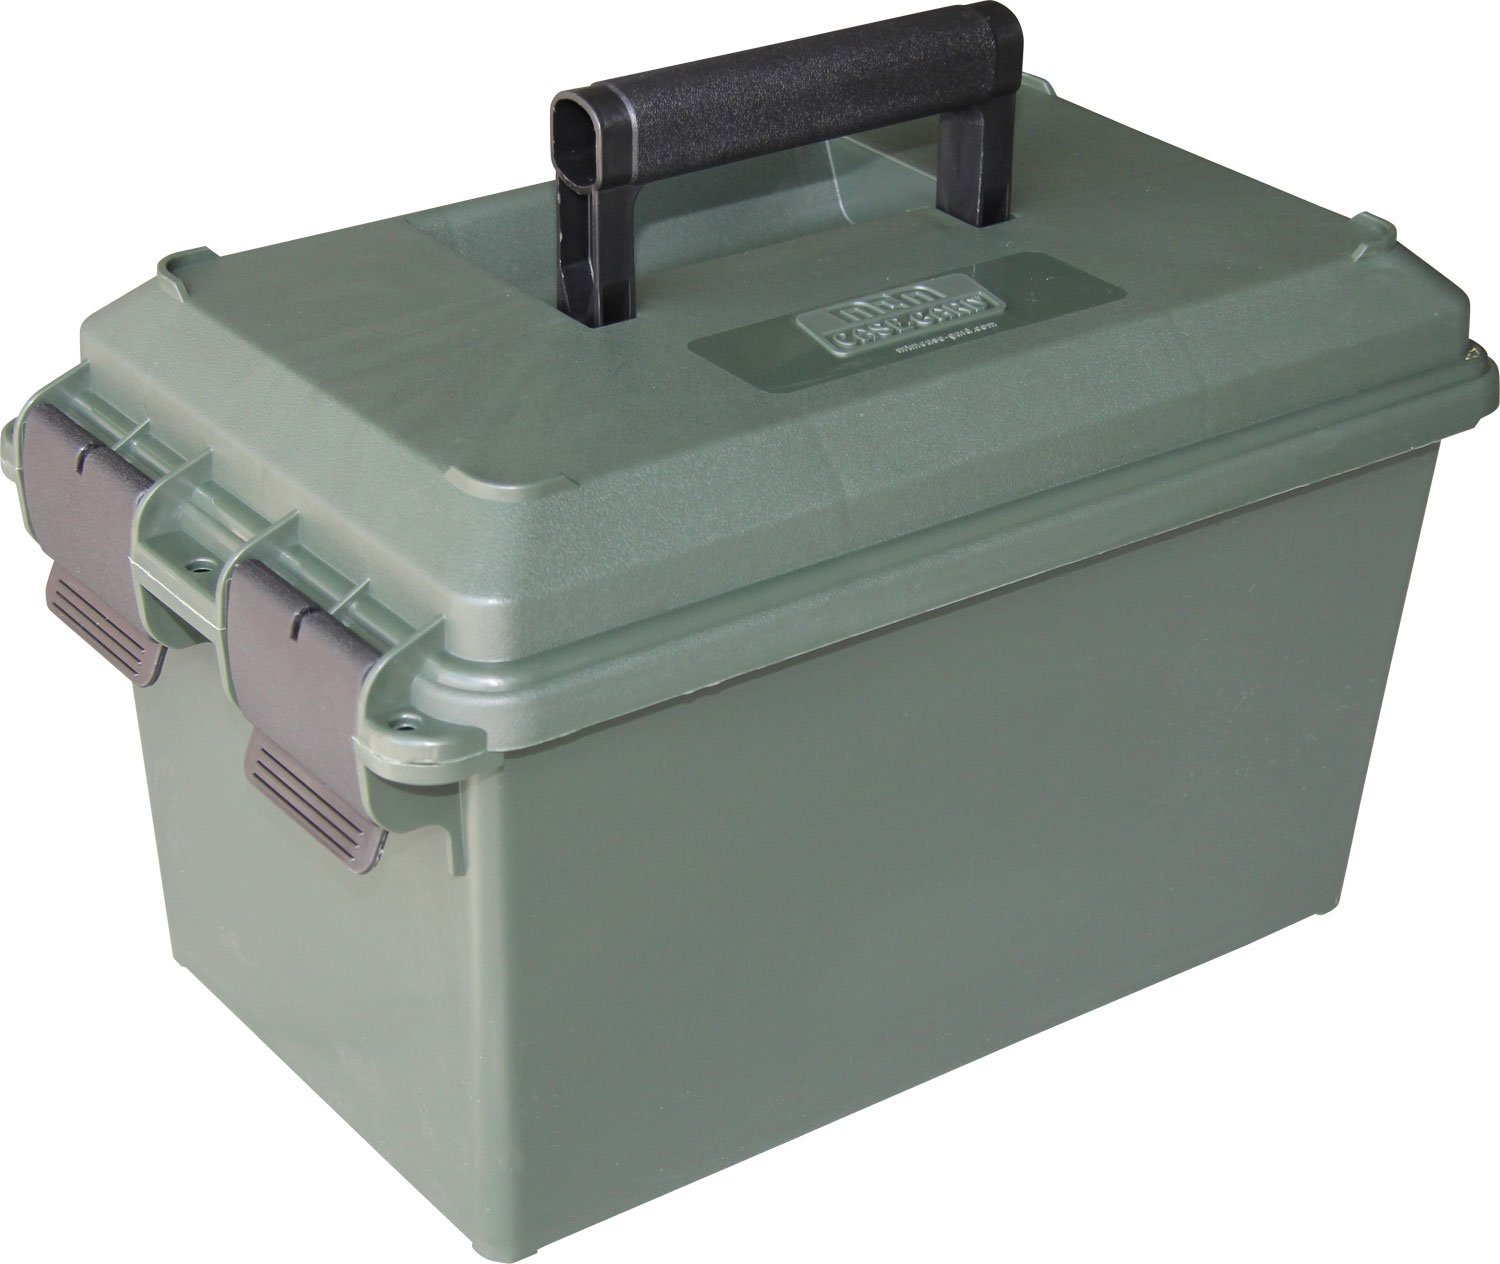 Book Cover MTM Ammo Can - Dry Storage Box - AC11, Forest Green